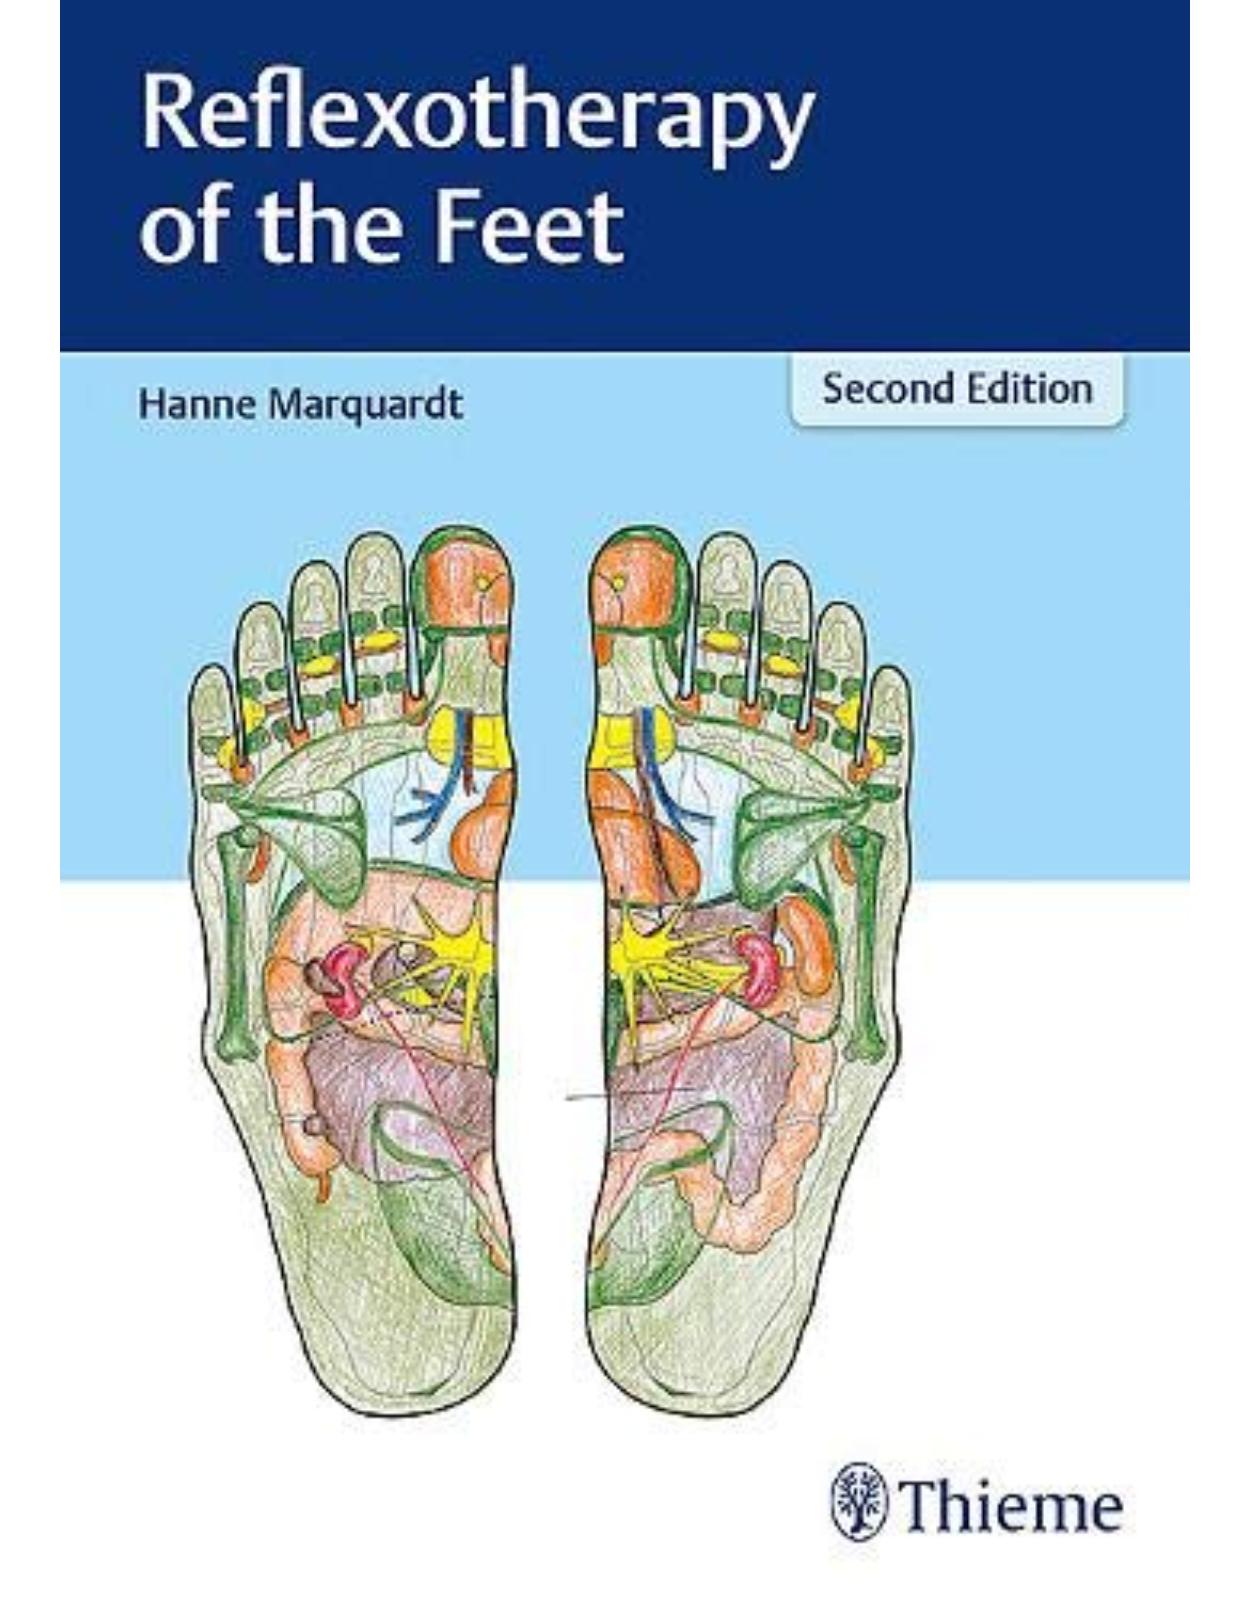 Reflexotherapy of the Feet